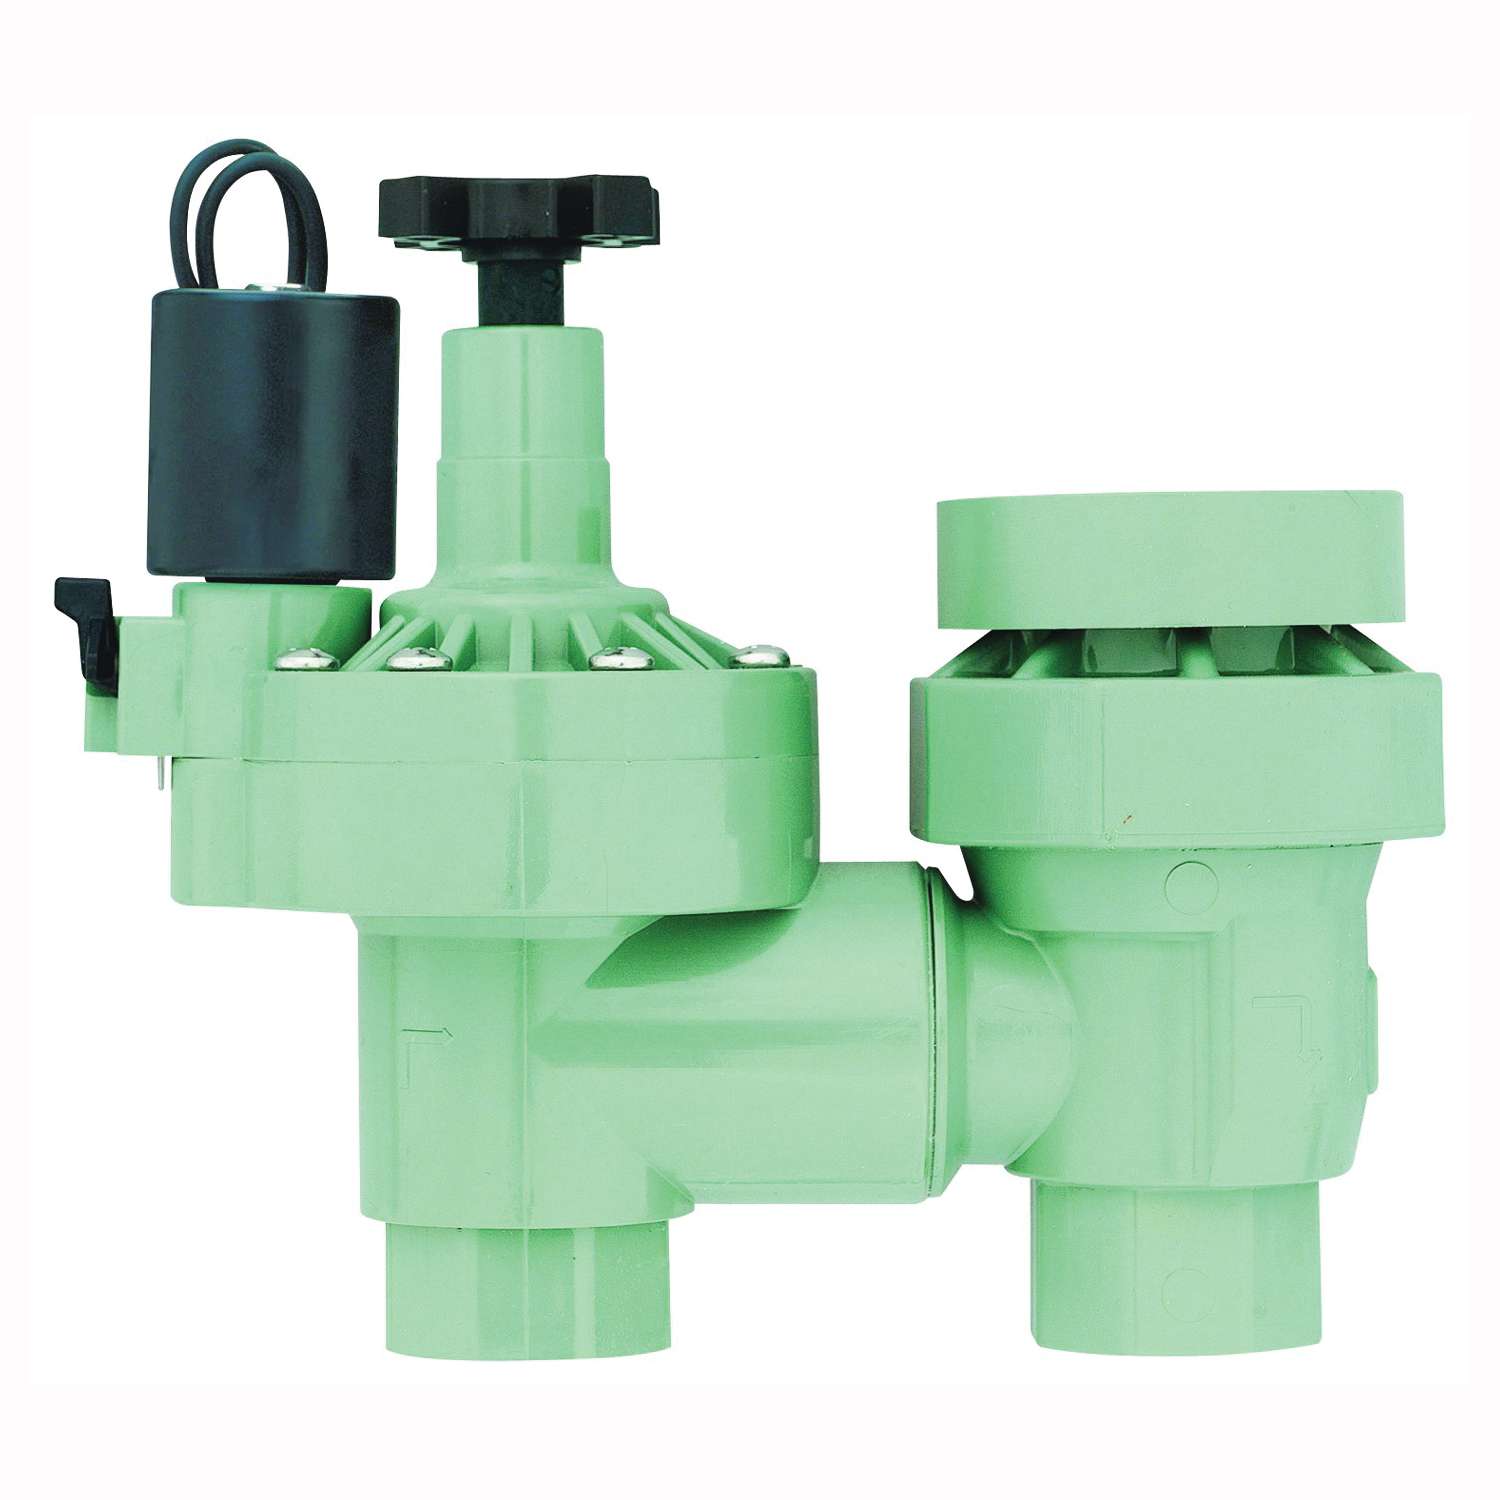 57624 Anti-Siphon Valve, 1 in, FNPT, 10 to 125 psi Pressure, 5 to 40 gpm, 24 V, Plastic Body